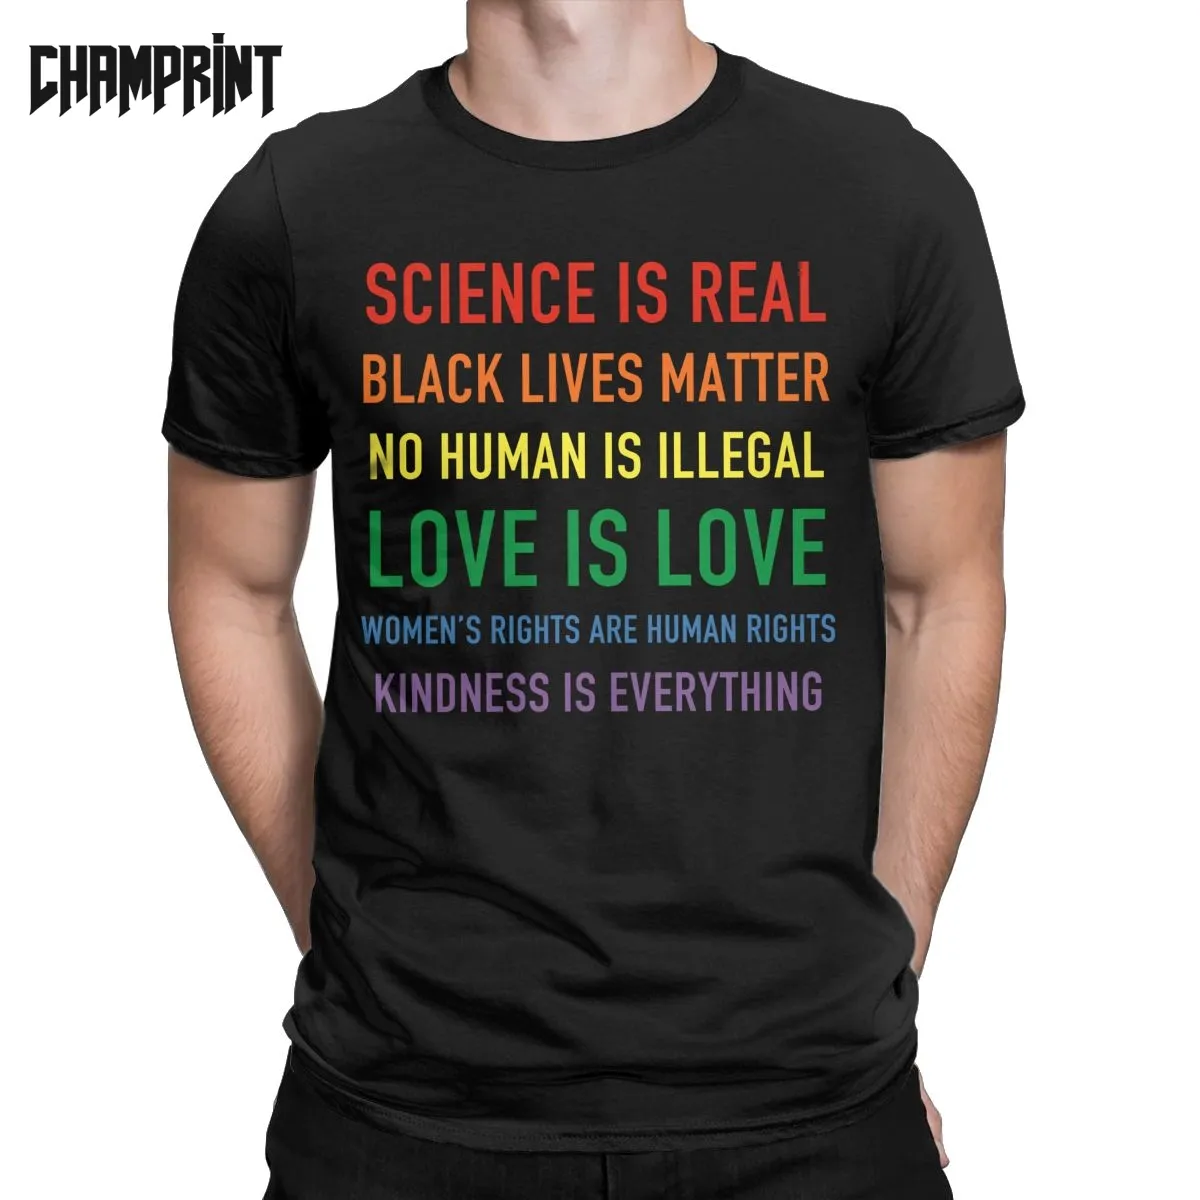 Science Is Real Black Lives Matter T Shirts for Men Cotton T-Shirts O Neck Police Rip Peace America Tee Shirt Short Sleeve Tops